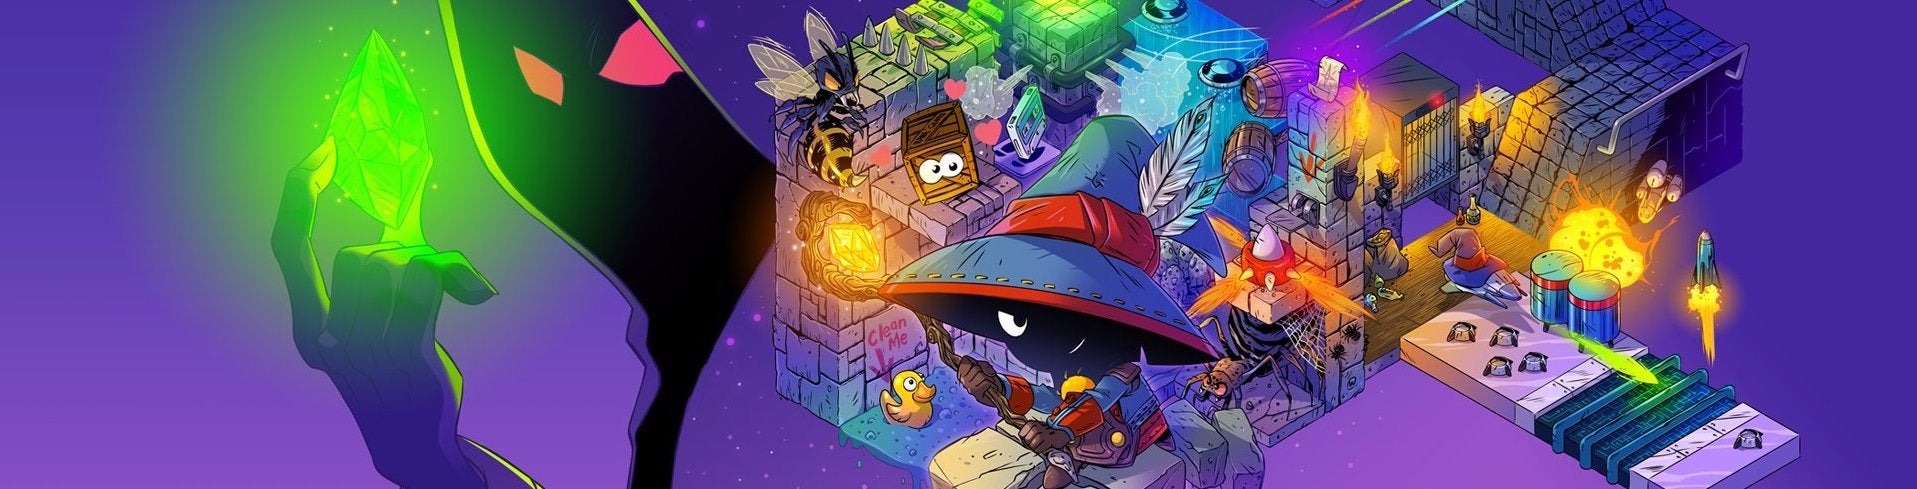 Image for Watch: Ian plays Lumo with the creator of Lumo